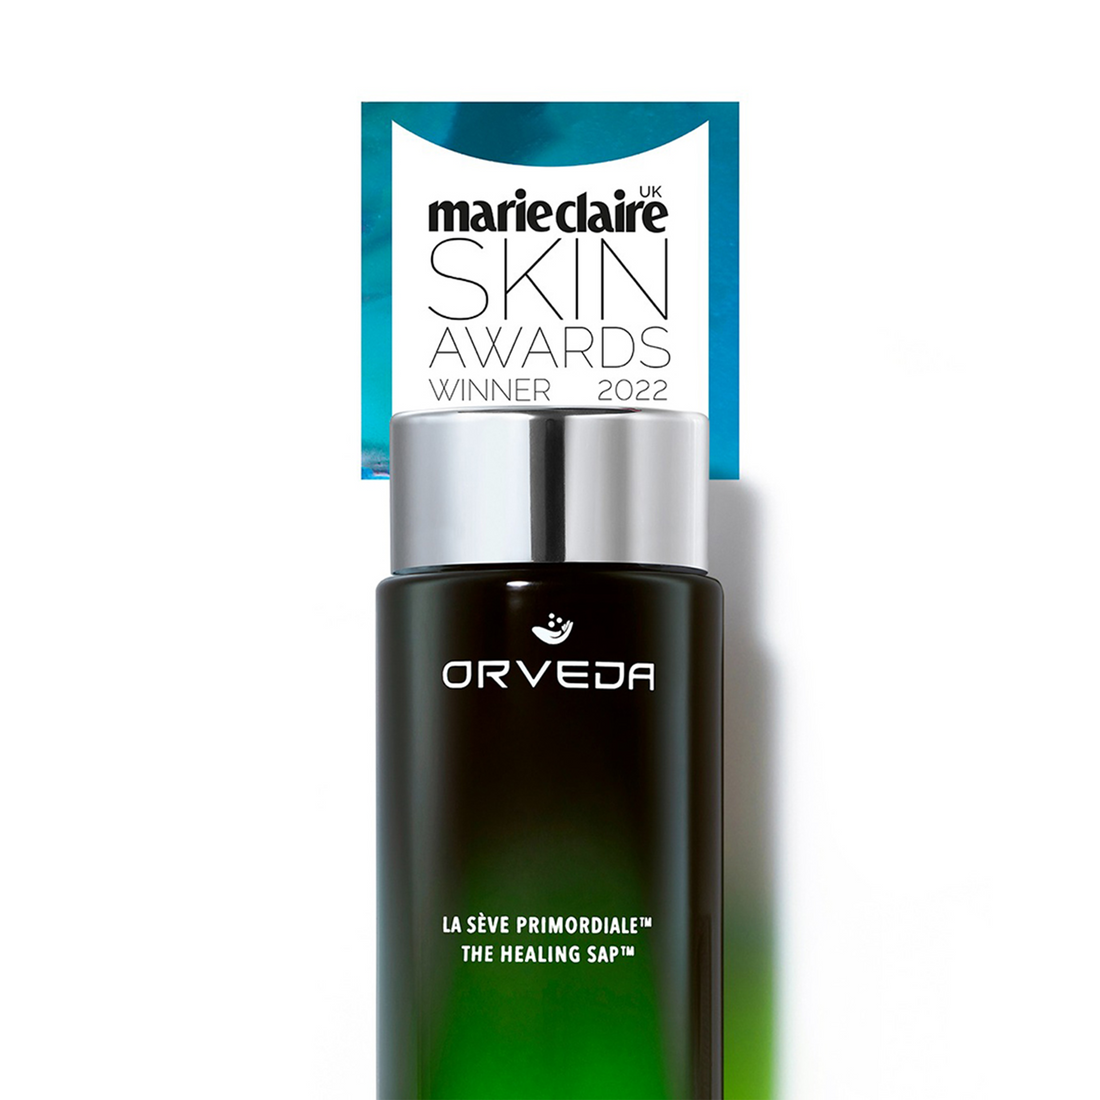 THE HEALING SAP™ WINS A MARIE CLAIRE UK SKINCARE AWARD FOR THE BEST TONER/ESSENCE